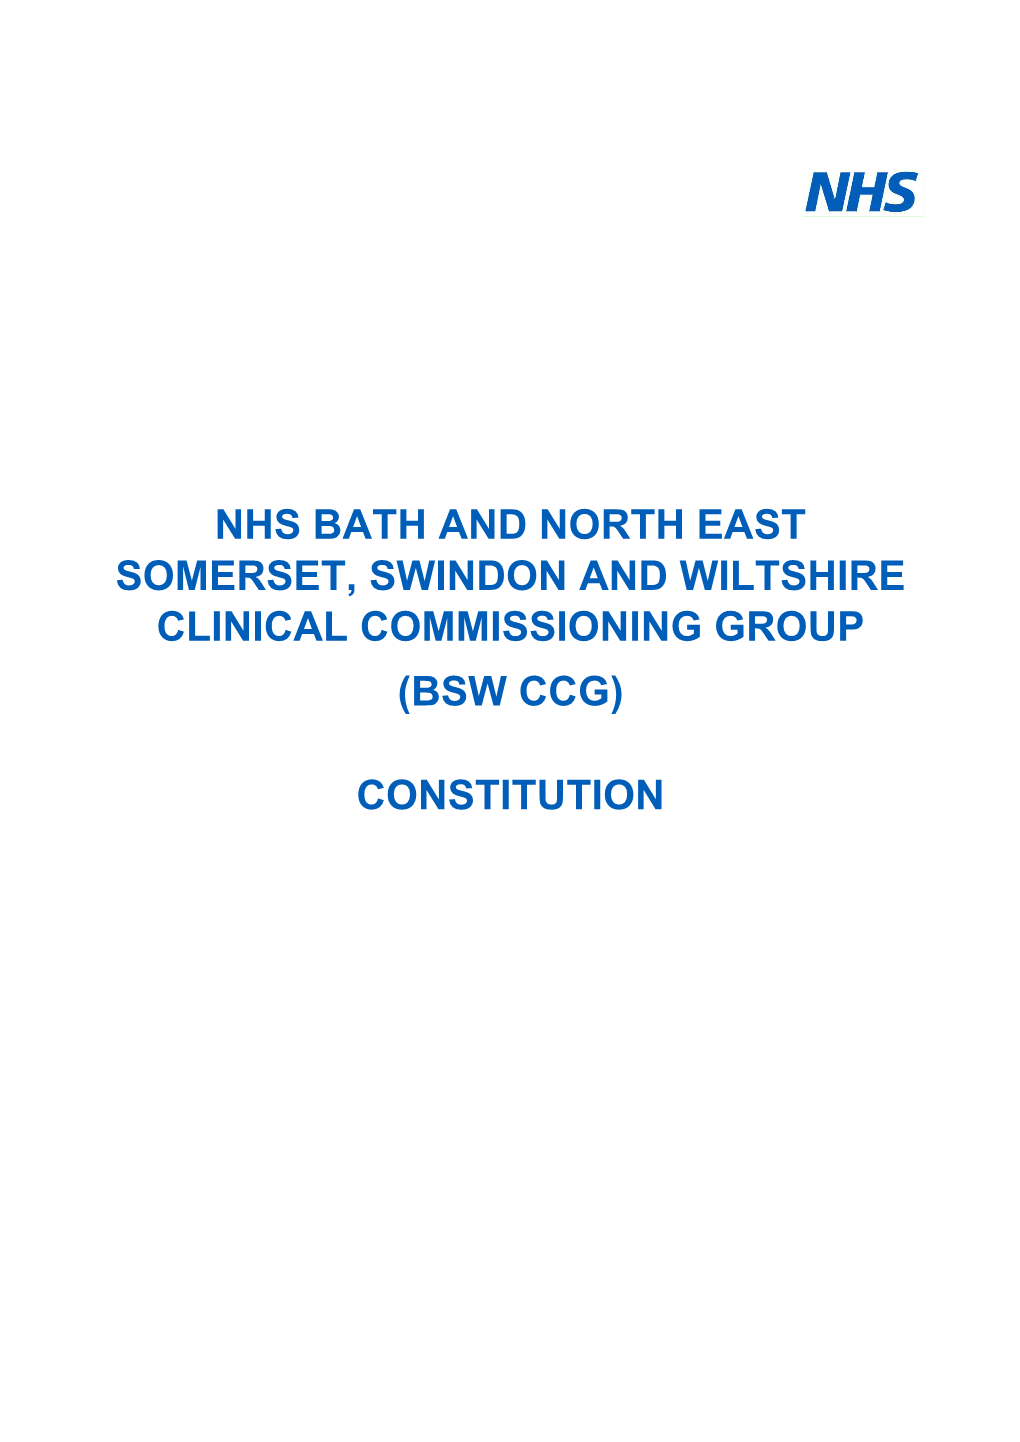 Nhs Bath and North East Somerset, Swindon and Wiltshire Clinical Commissioning Group (Bsw Ccg)